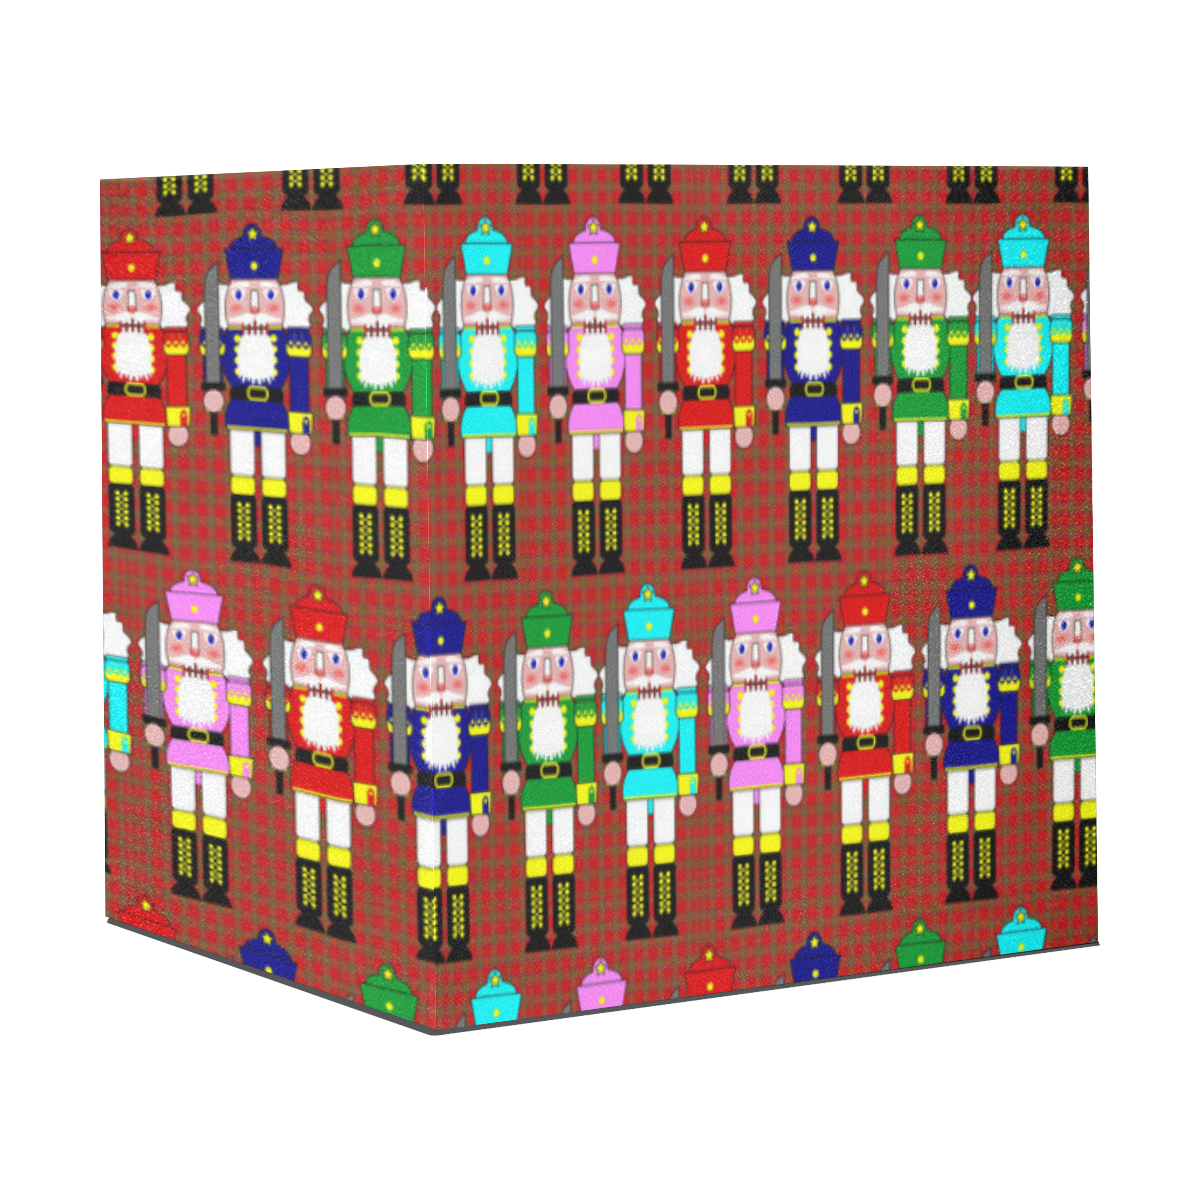 Christmas Nutcracker Toy Soldiers on Red Plaid Gift Wrapping Paper 58"x 23" (5 Rolls)